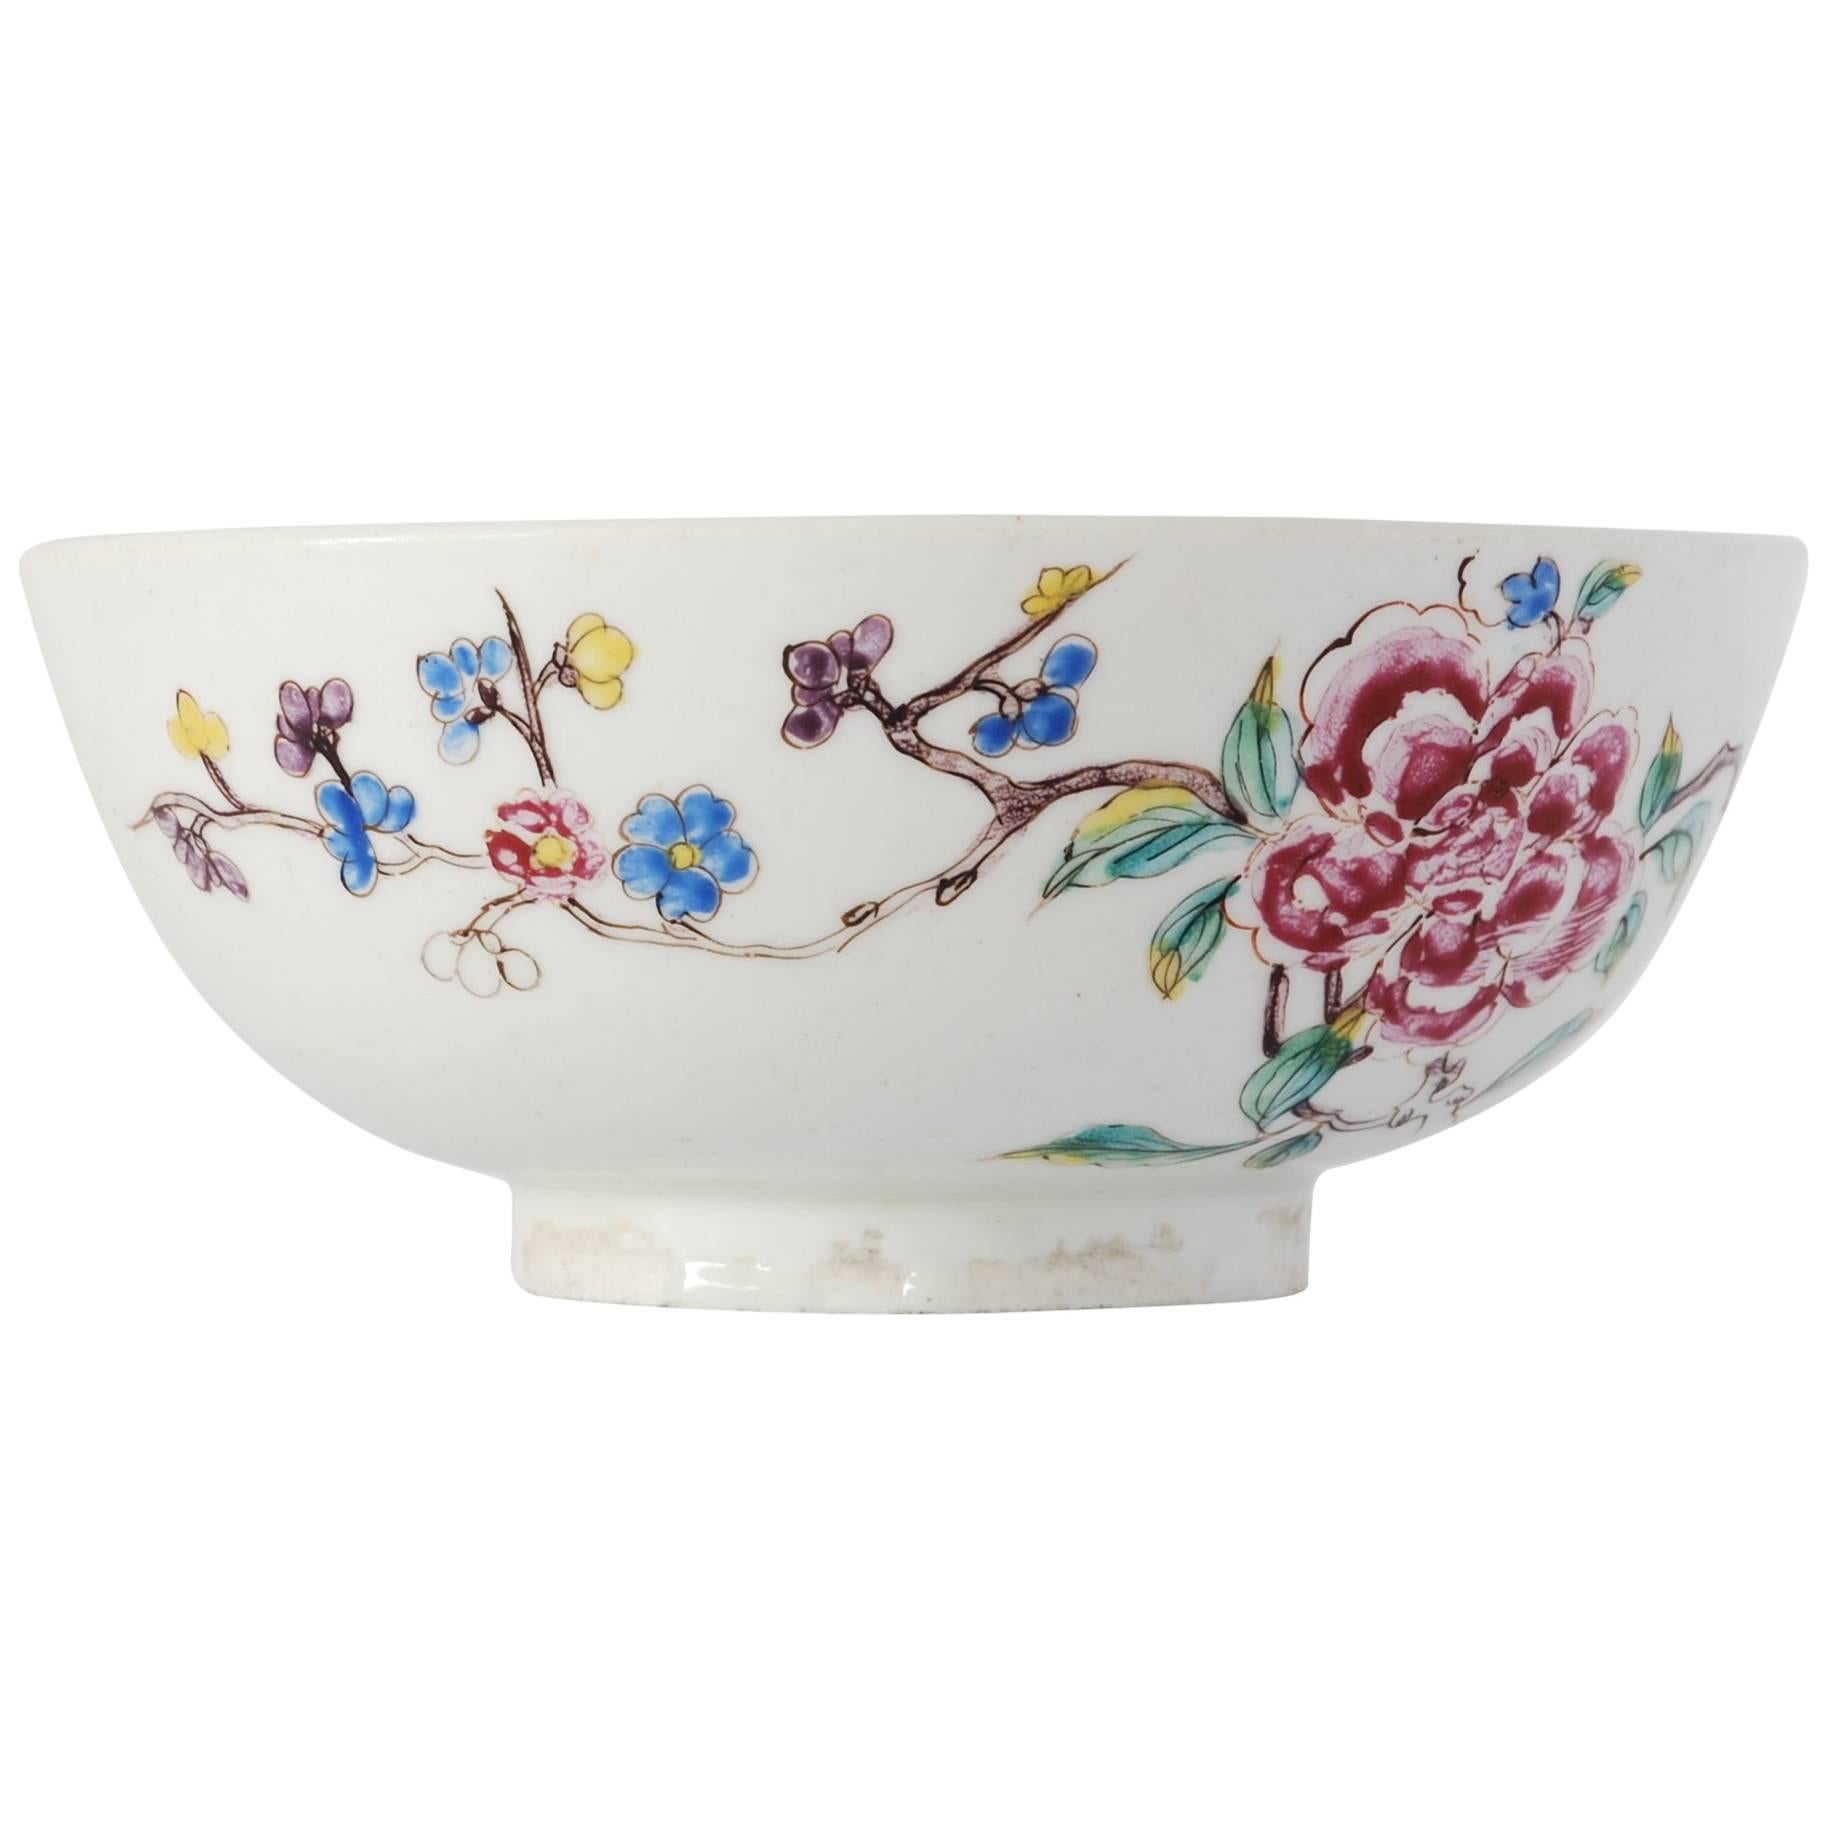 Bowl with Chinoiserie Decoration, Bow Porcelain Factory, circa 1752